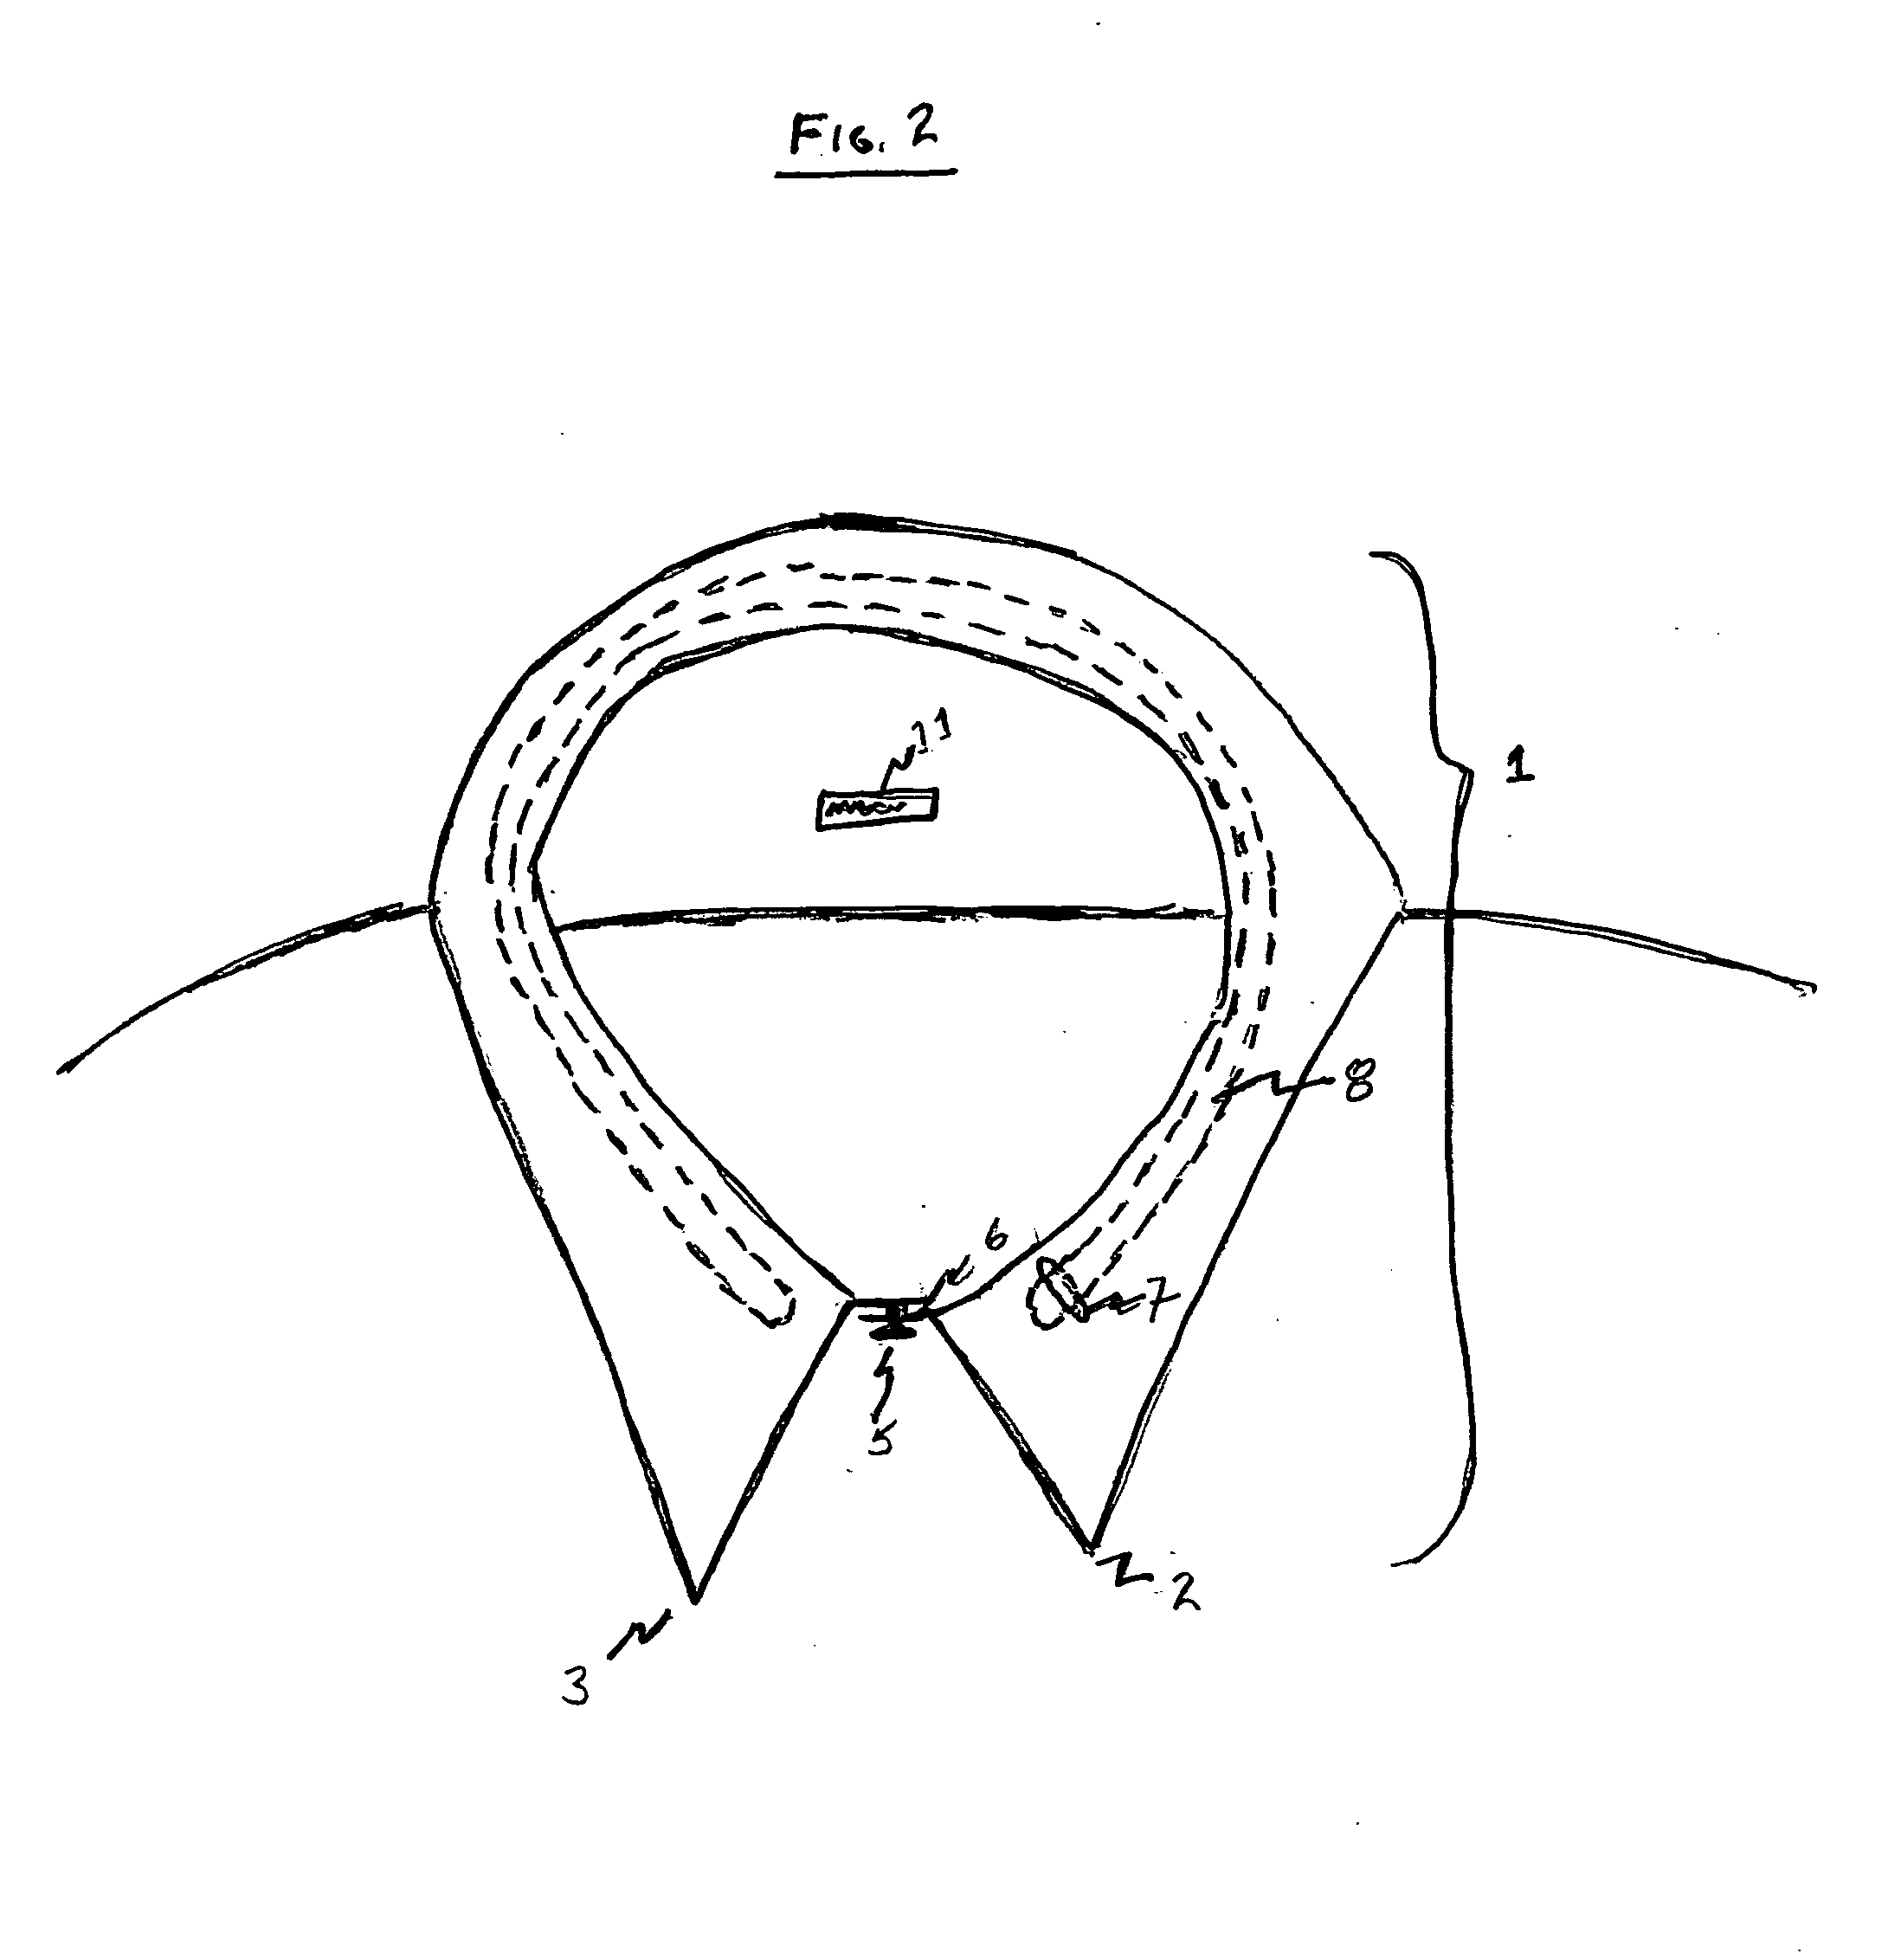 Collar-ring to improve comfort and tie position on a shirt